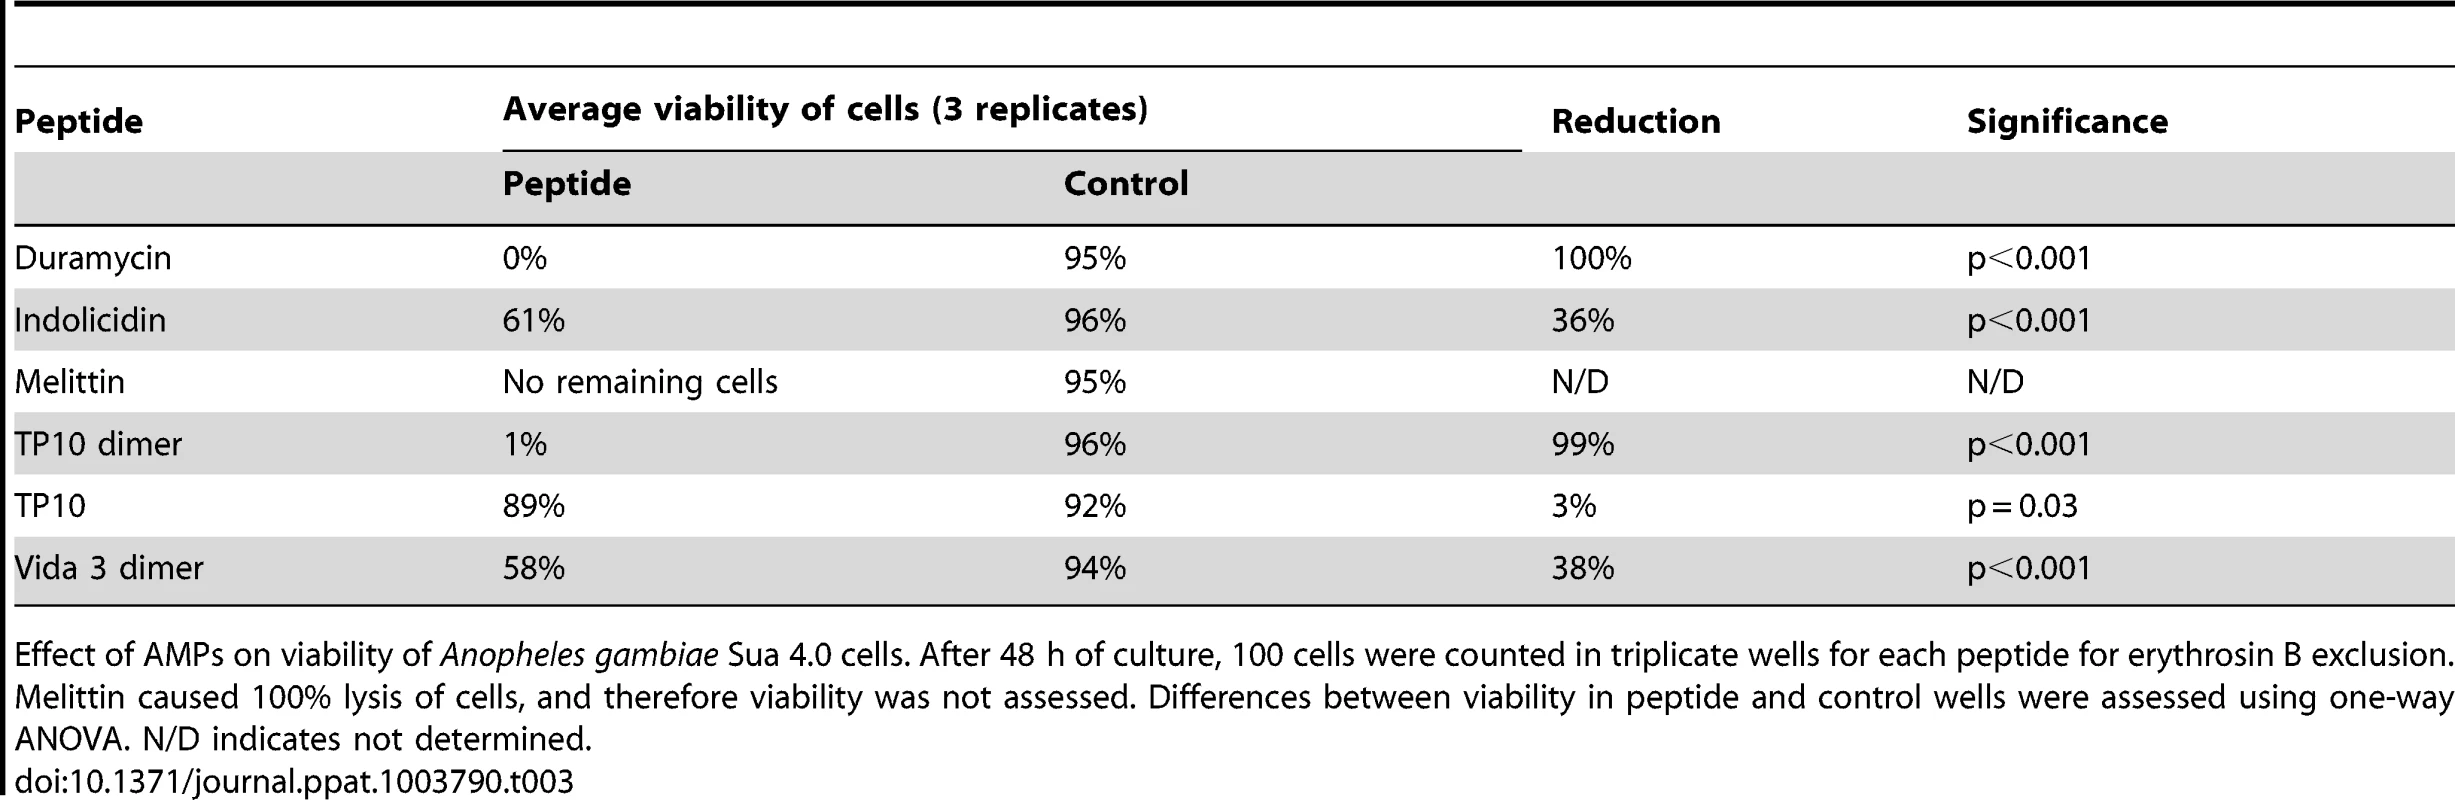 Effects of AMPs on <i>Anopheles gambiae</i> Sua 4.0 cell viability after 48 hrs.